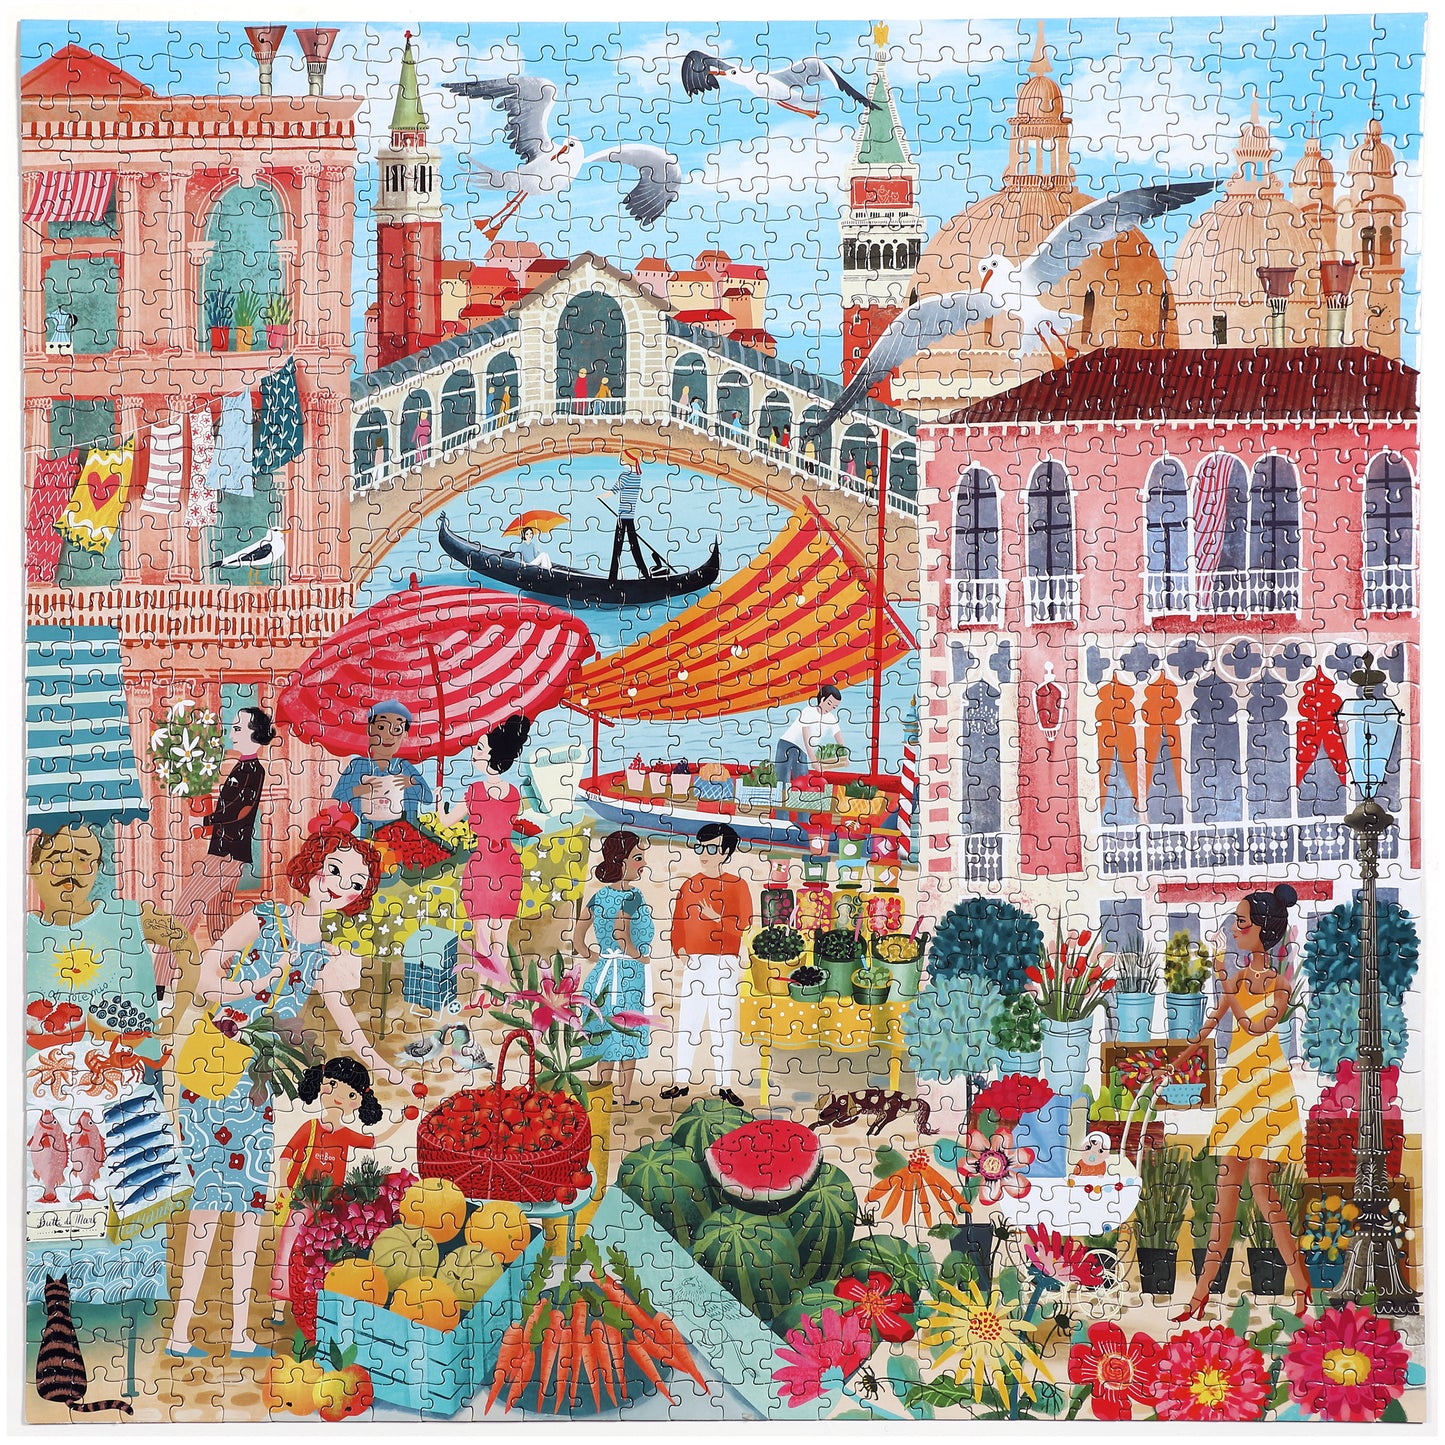 Venice Italy Open Market 1000 Piece Jigsaw Puzzle | eeBoo Piece & Love | Gifts for Travel Lovers